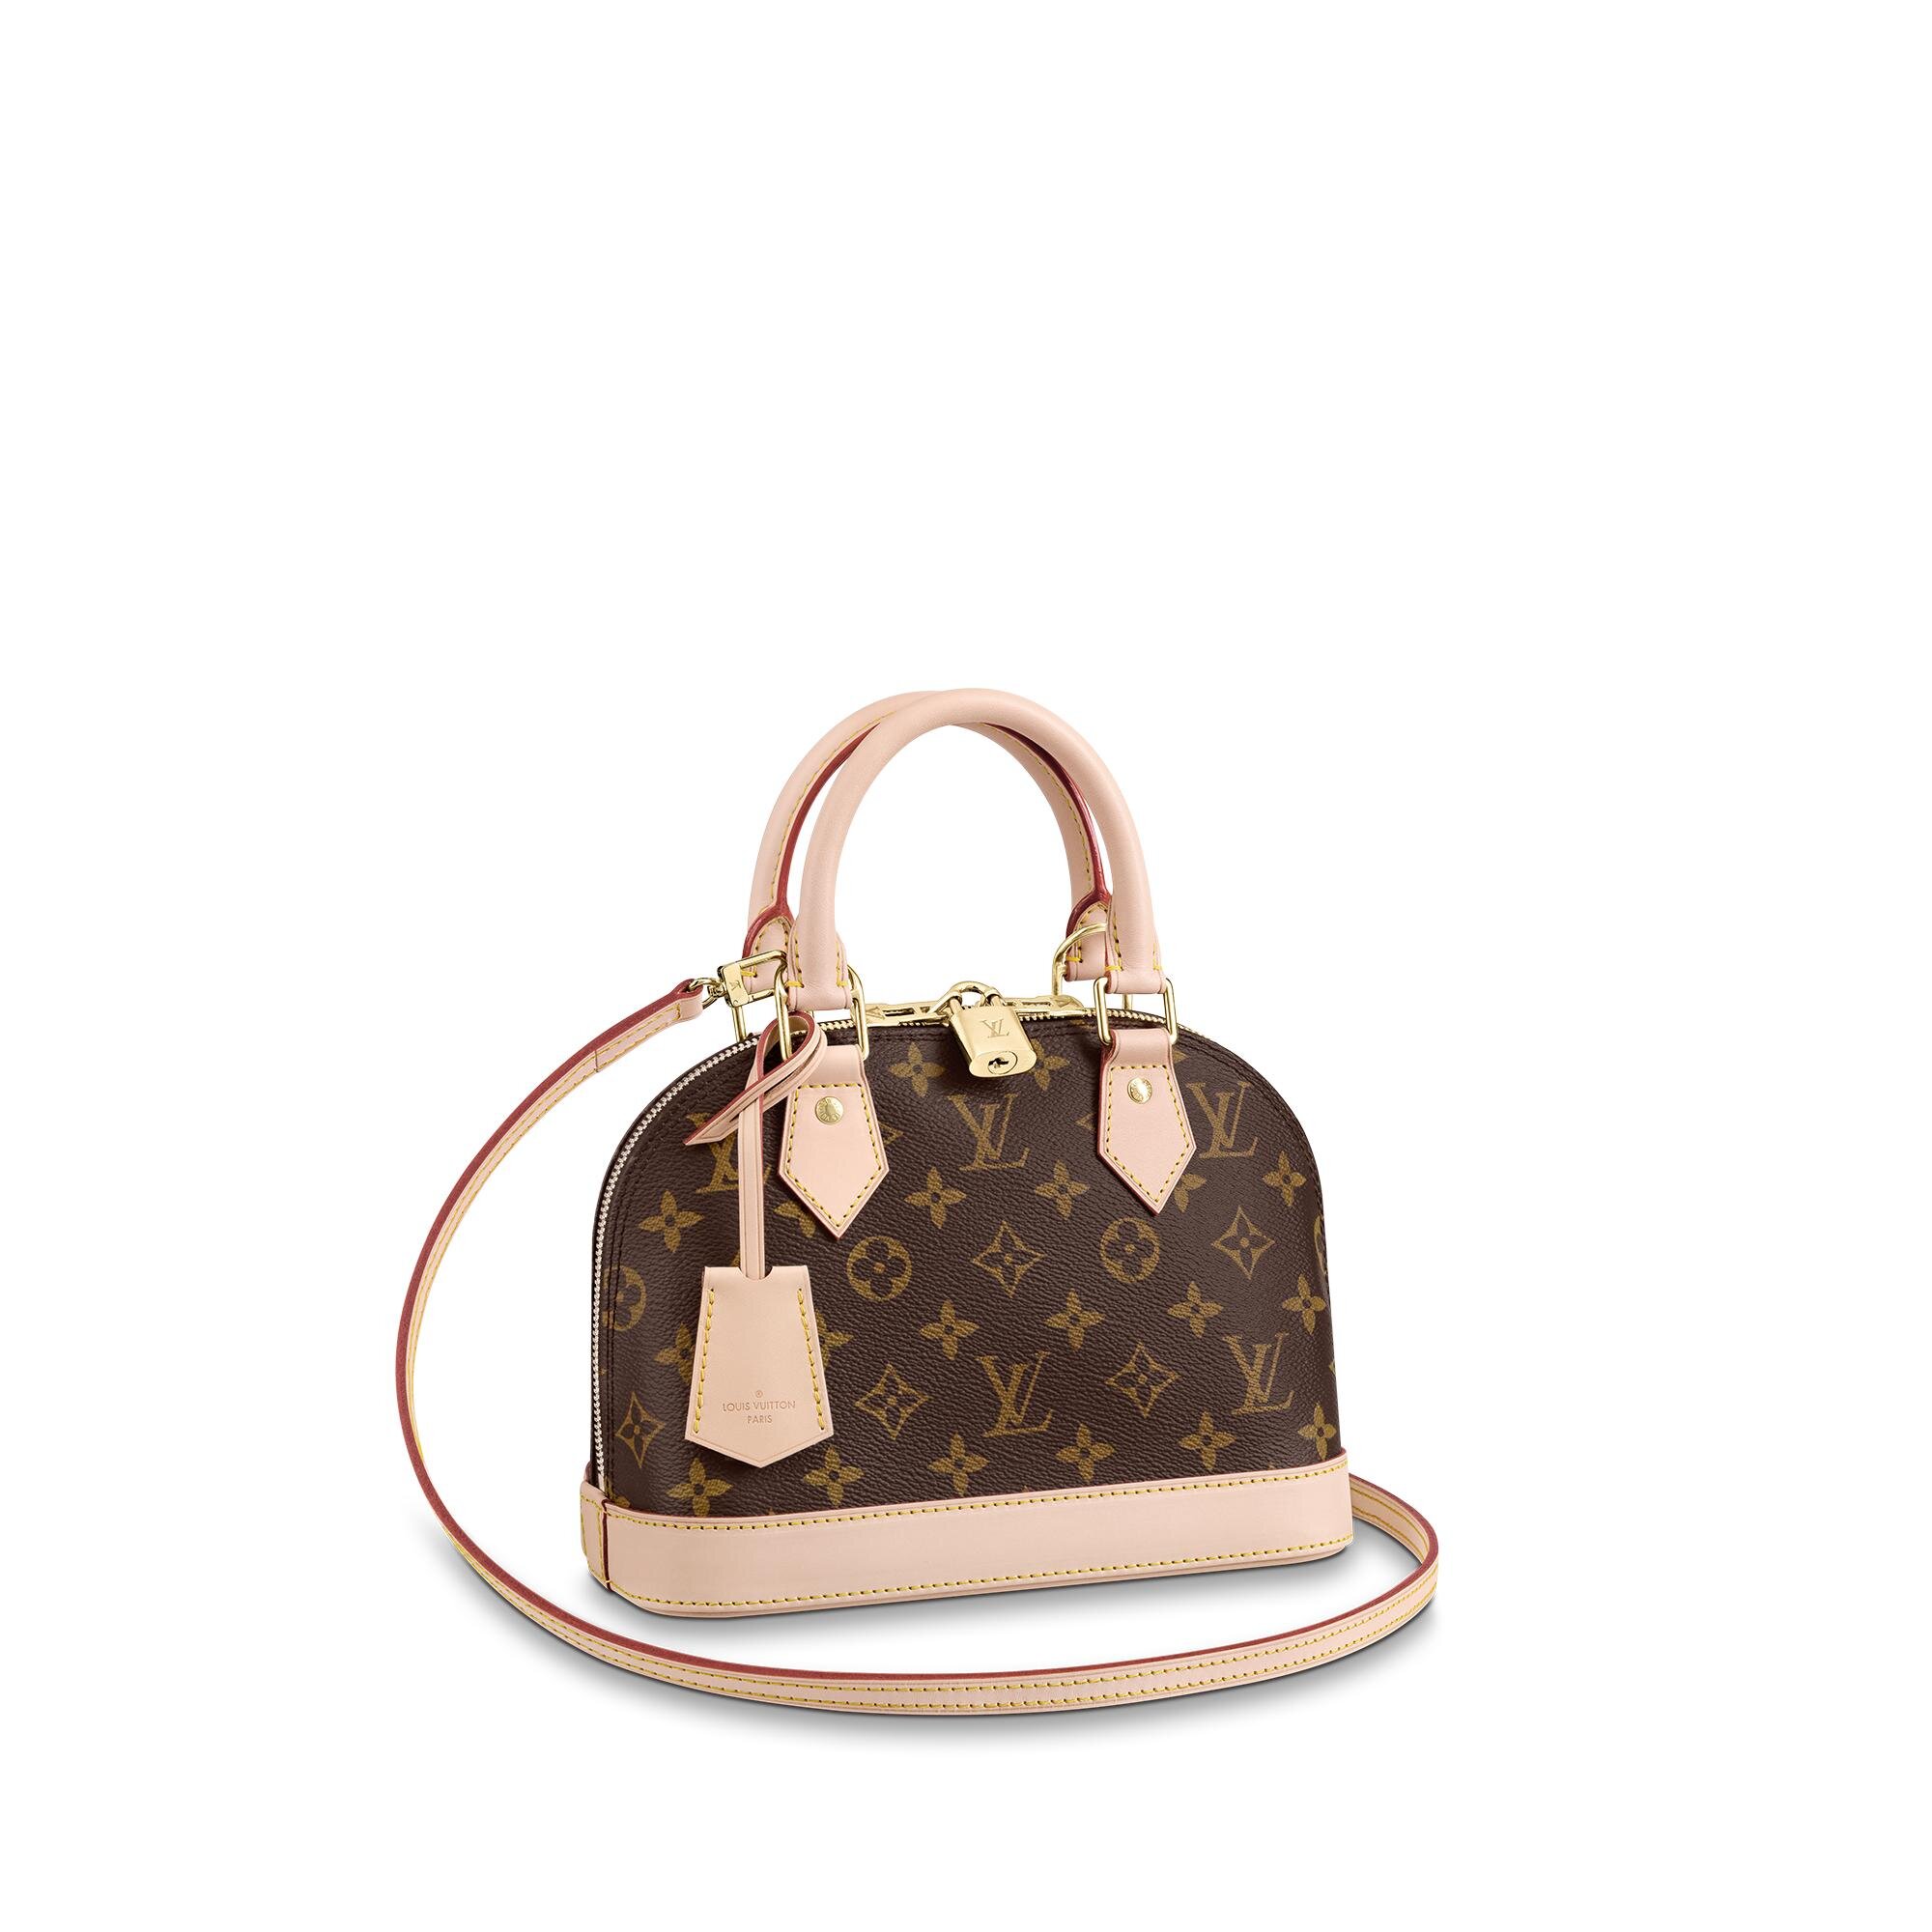 Louis Vuitton Bag Price List 2020 — Collecting Luxury